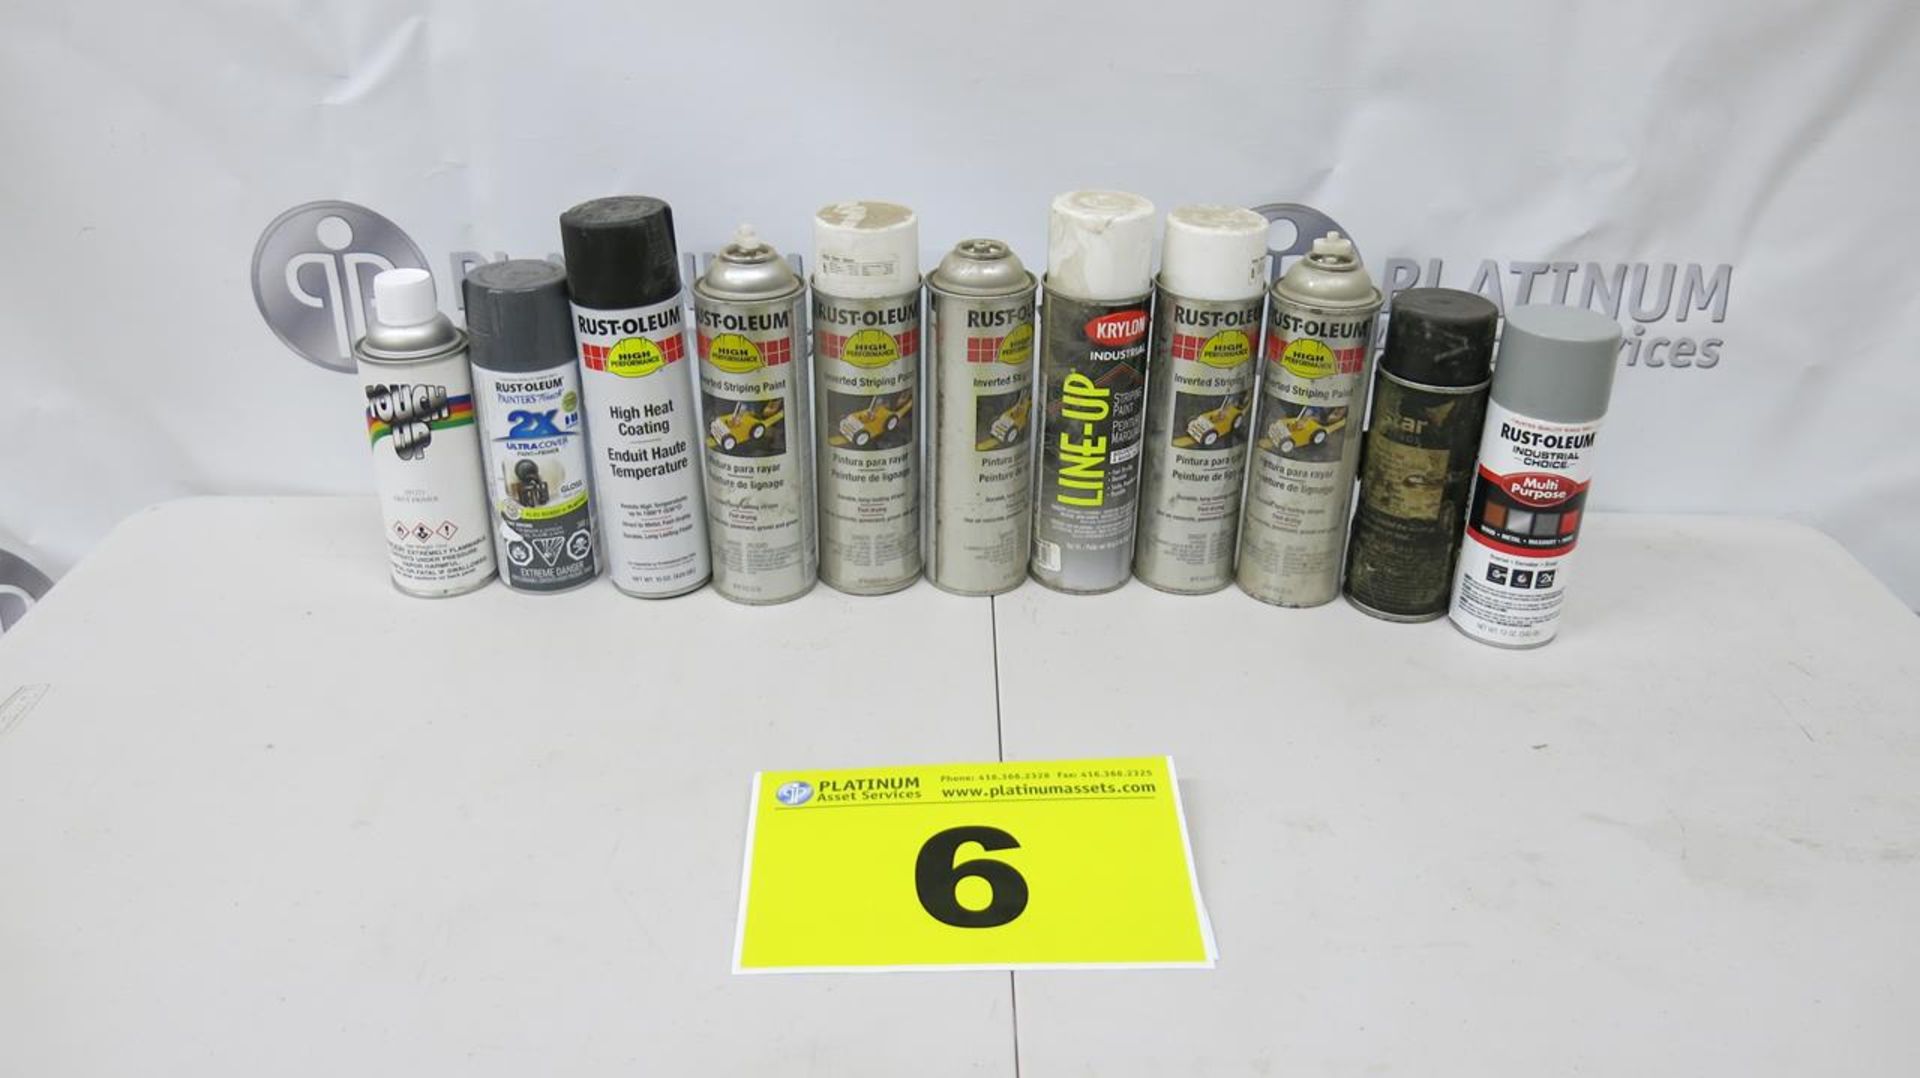 LOT OF RUST-OLEUM, ASSORTED SPRAY PAINT, QTY 11